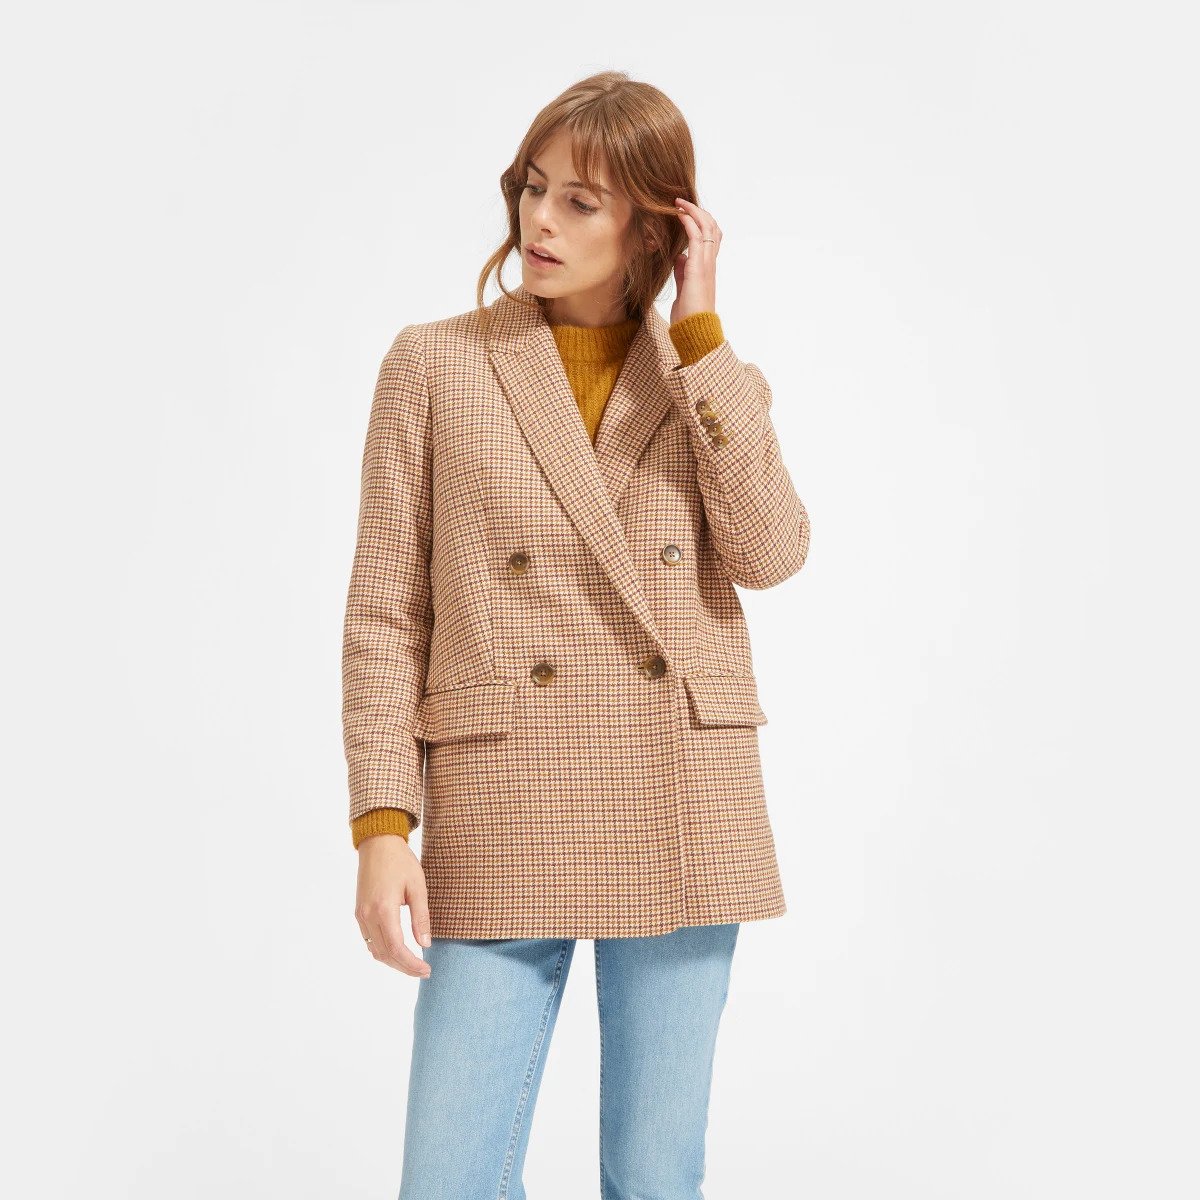 Everlane's Oversized Double Breasted Blazer Review + New Arrivals -  Crystalin Marie